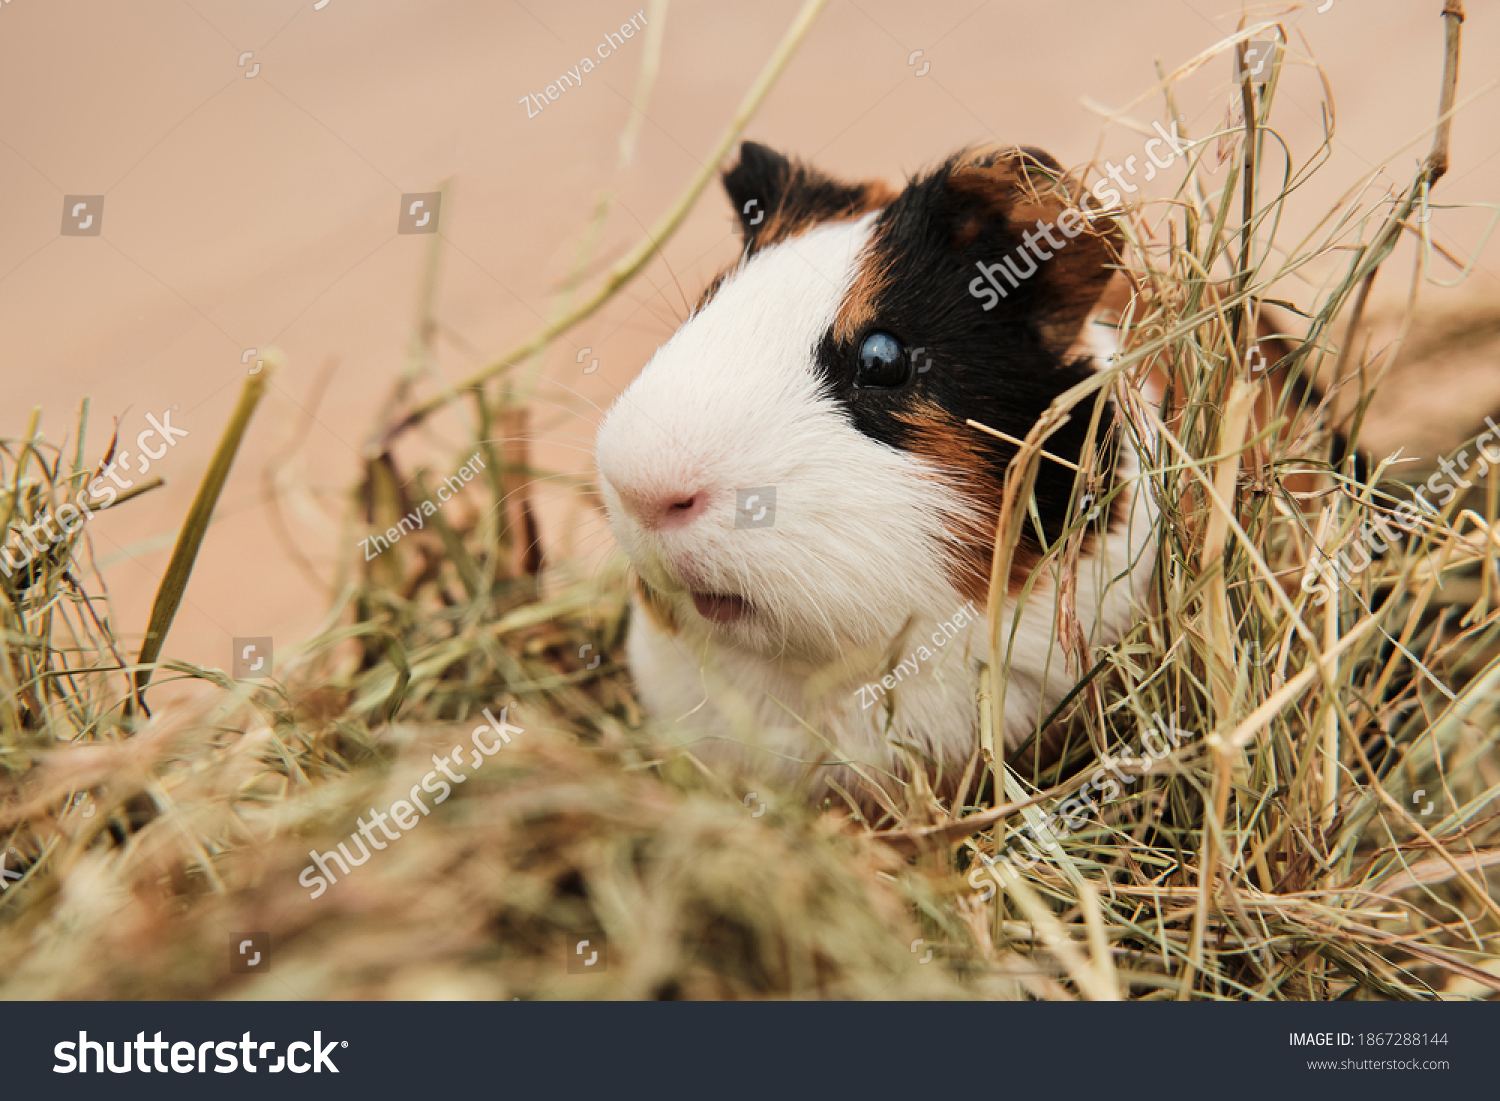 Guinea pig Cavia porcellus is a popular pet. The rodent sits among the hay and eats grass. Guinea pig studio portrait, animal care concept. #1867288144